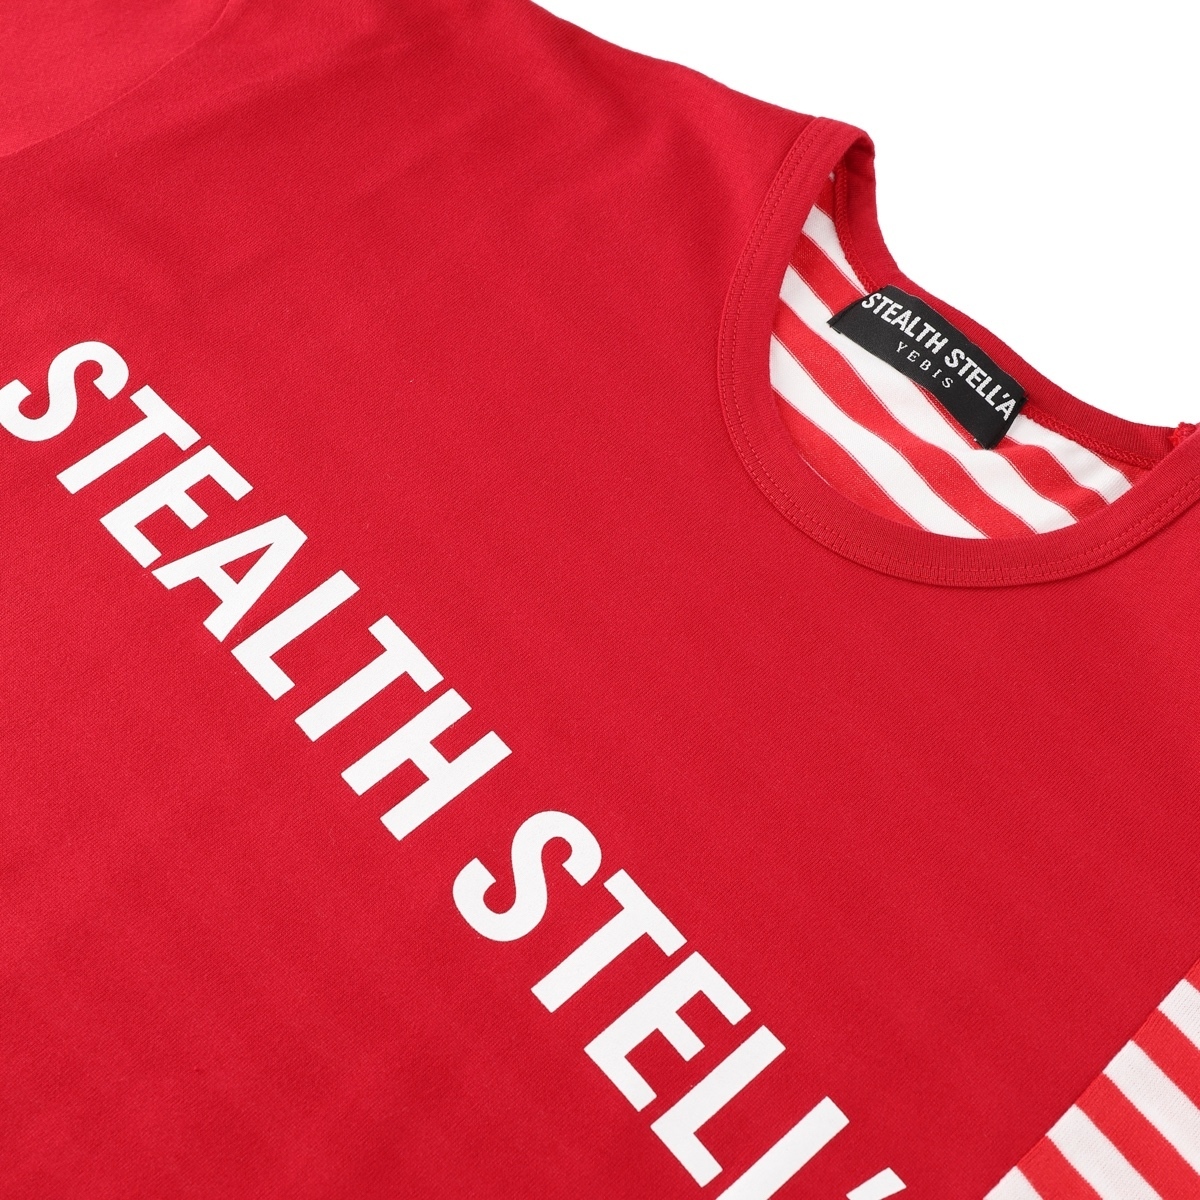 【STEALTH STELL'A】CONFINE（RED）